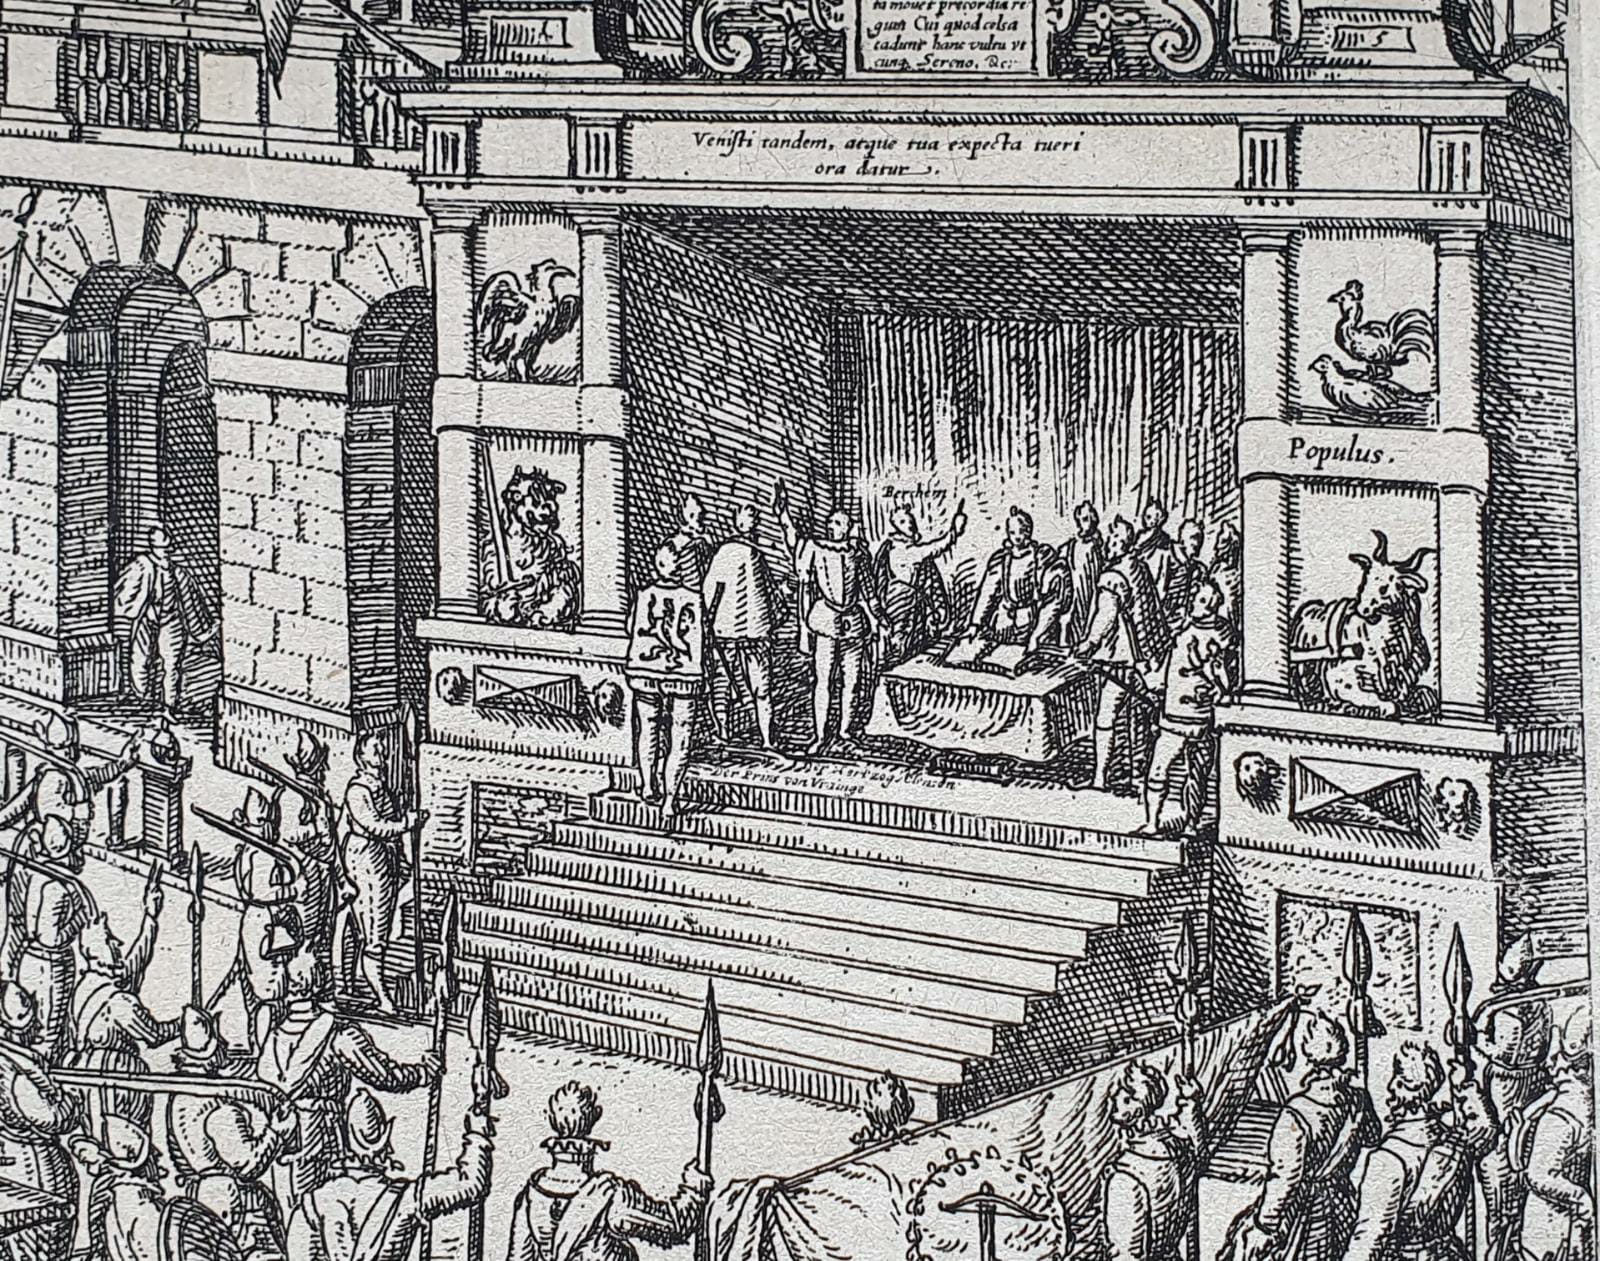 [Antique etching, ets, history print] F. Hogenberg, Anjou takes the oath to the city of Antwerp, published before 1600.